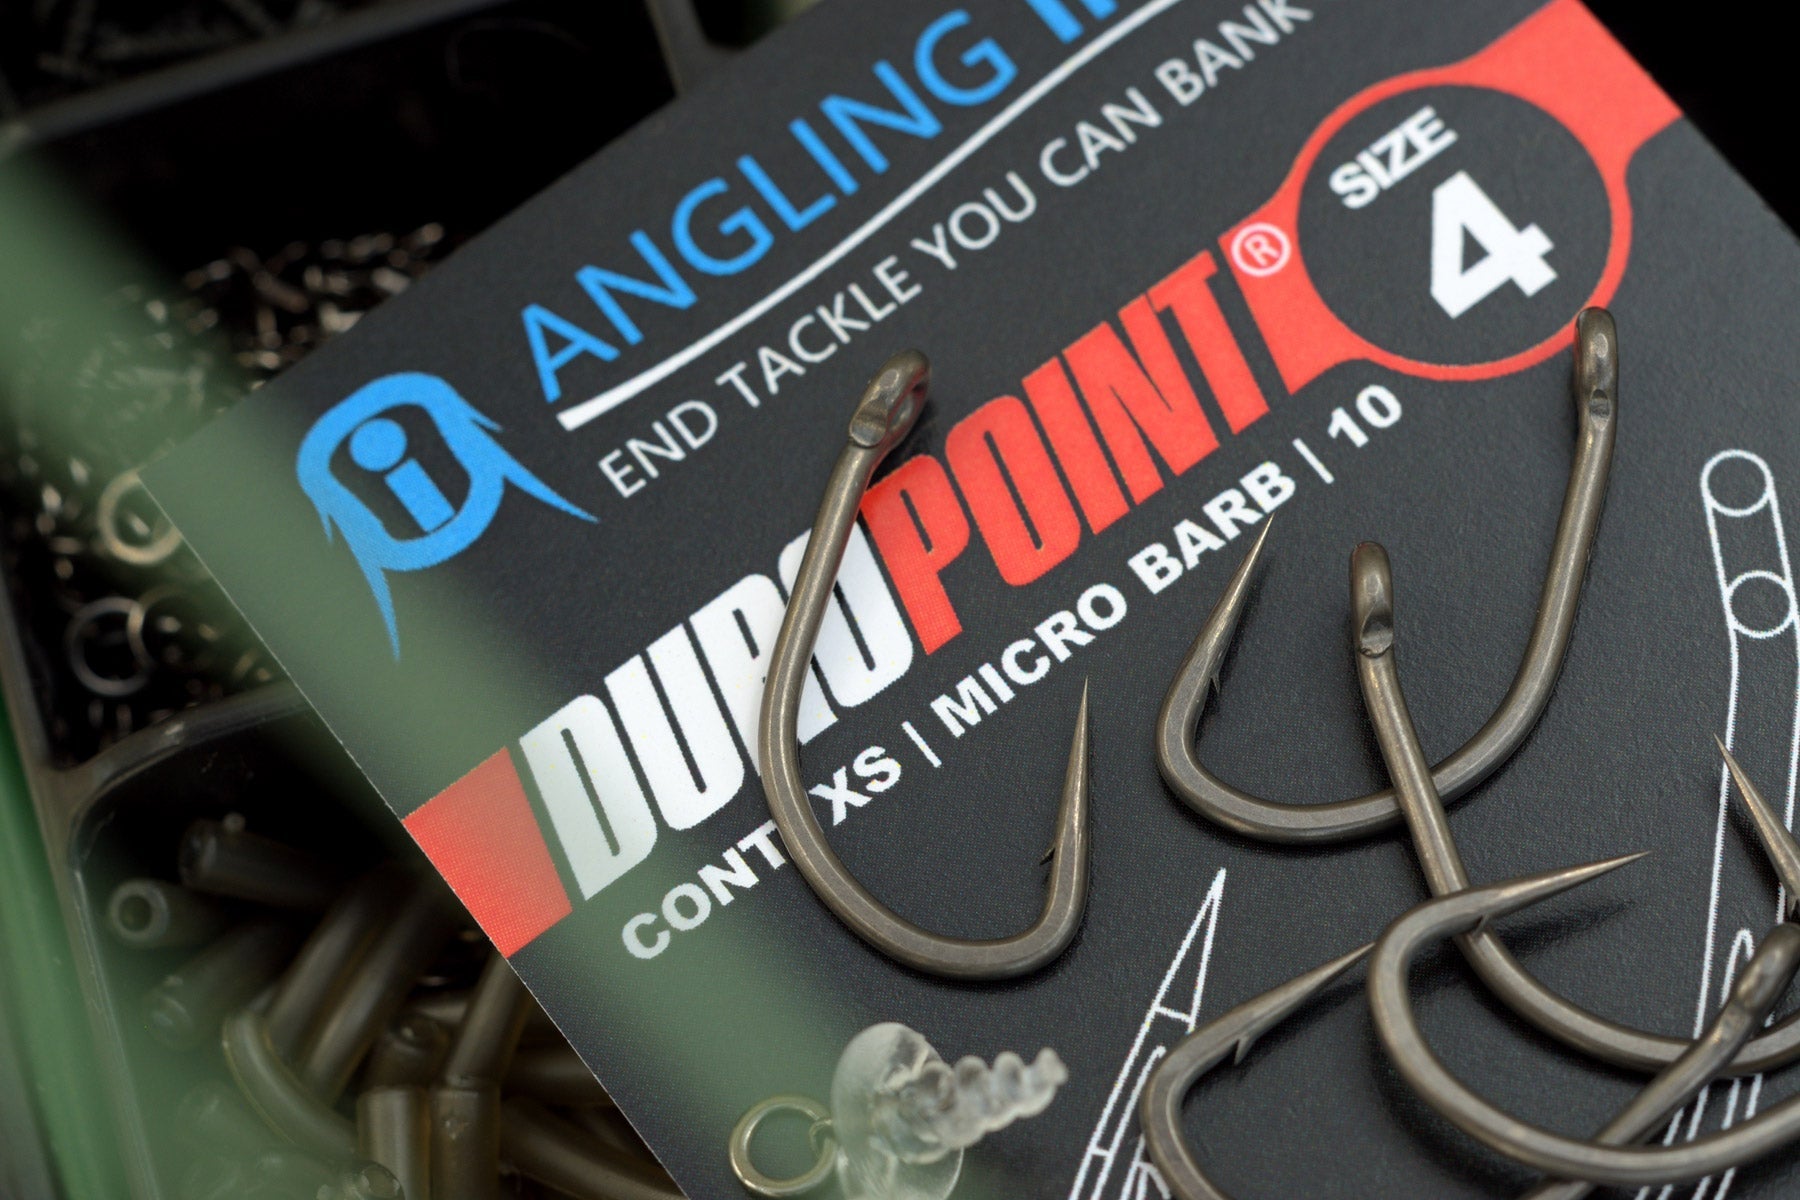 DUROPOINT CARP HOOKS - SIX INCREDIBLY SHARP AND STRONG PATTERNS TO COVER EVERY FISHING SITUATION